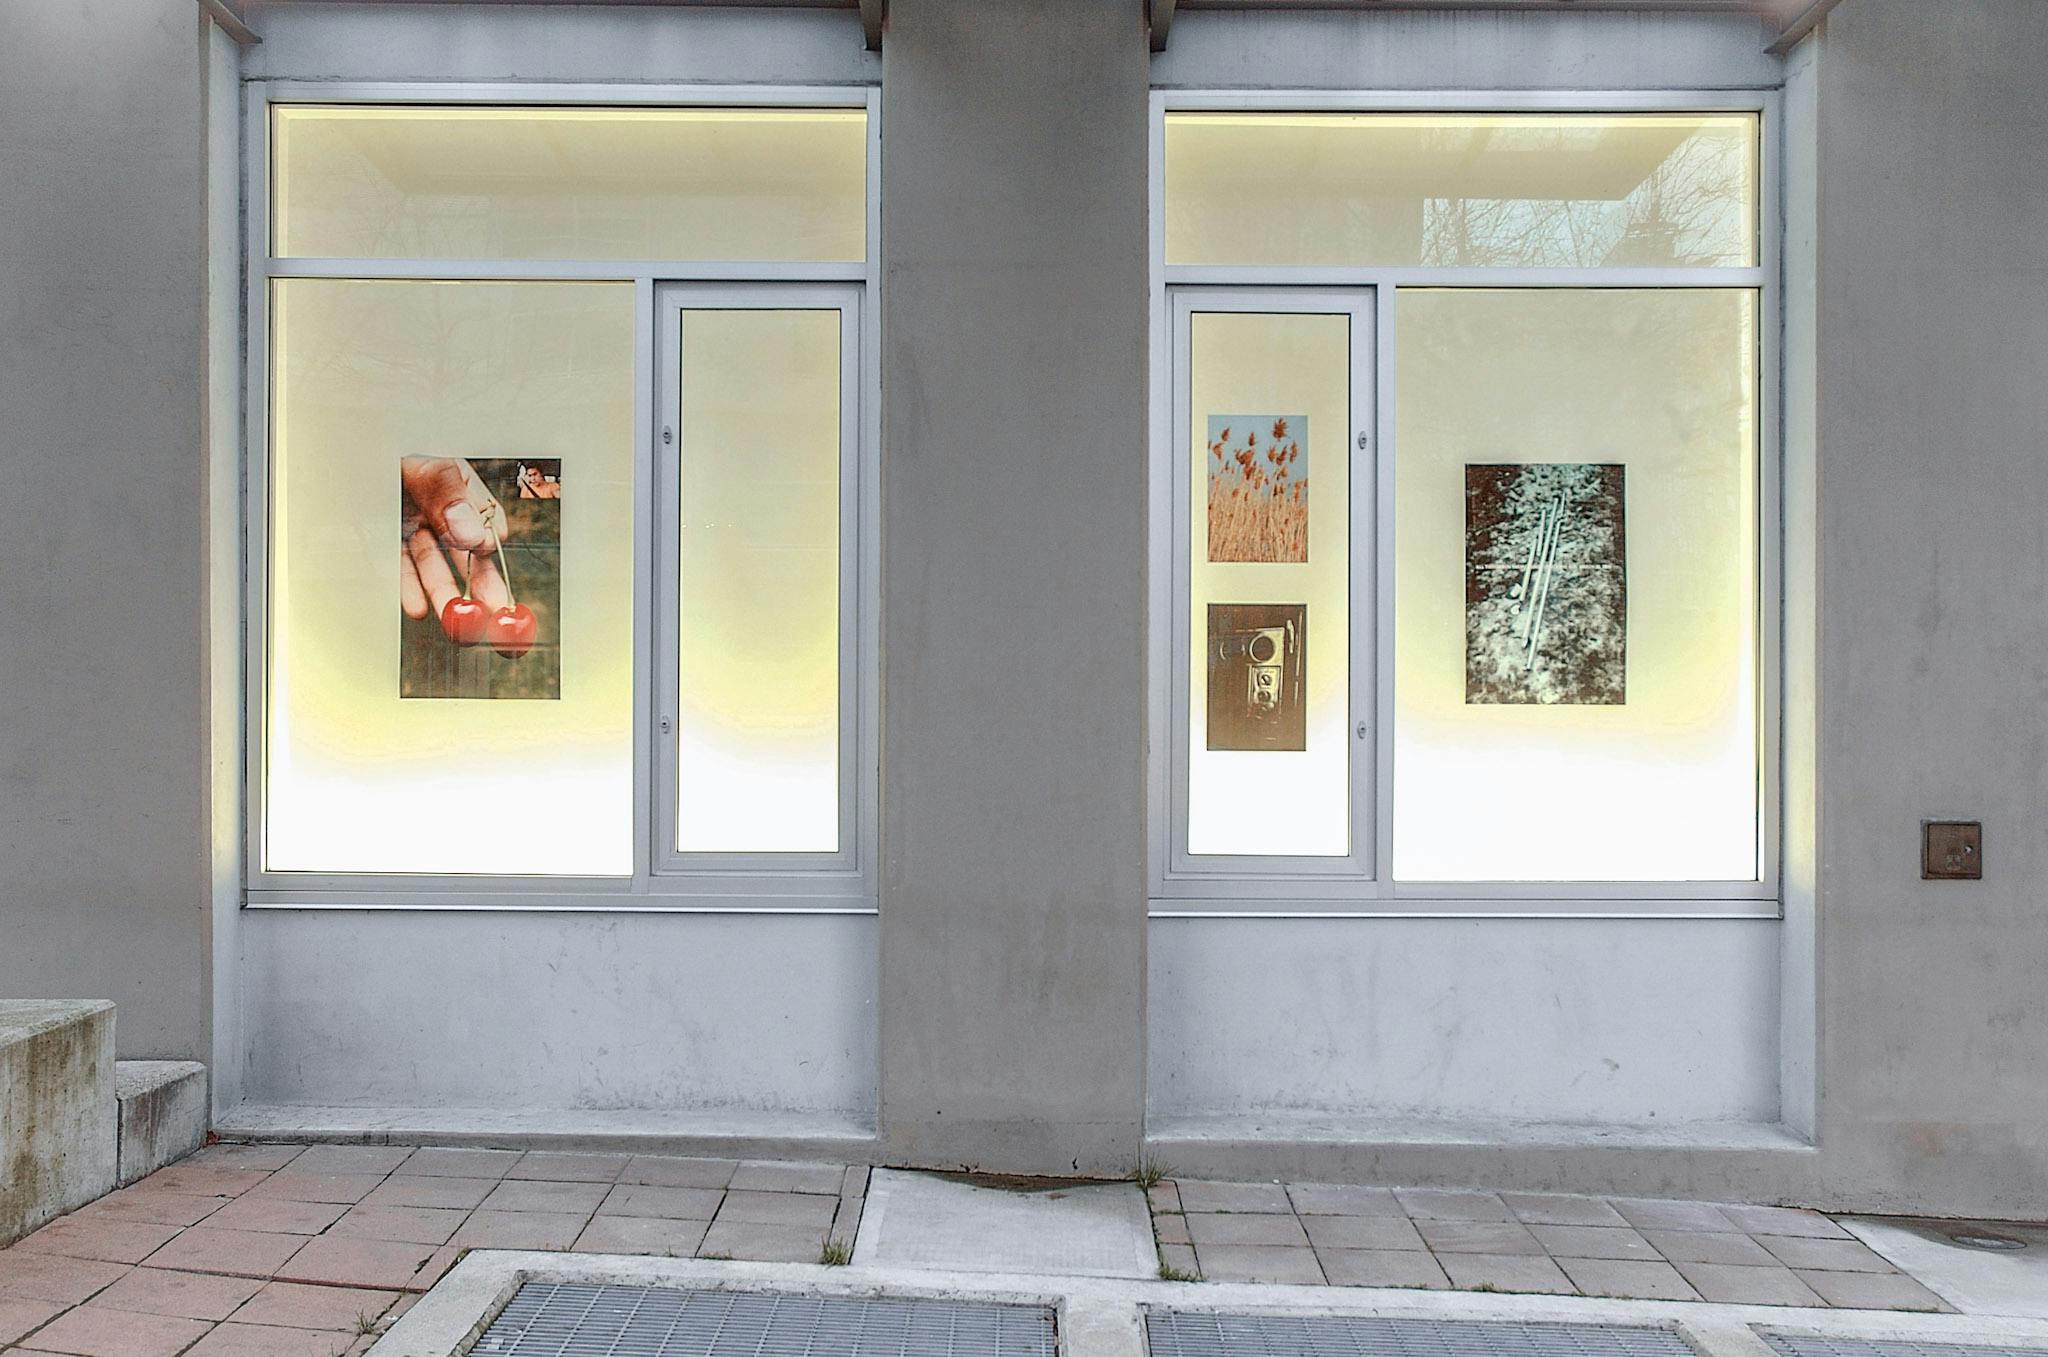 Four posters are mounted on the walls behind the windows on the CAG exterior. They are all coloured photographs taken in a natural environment. 